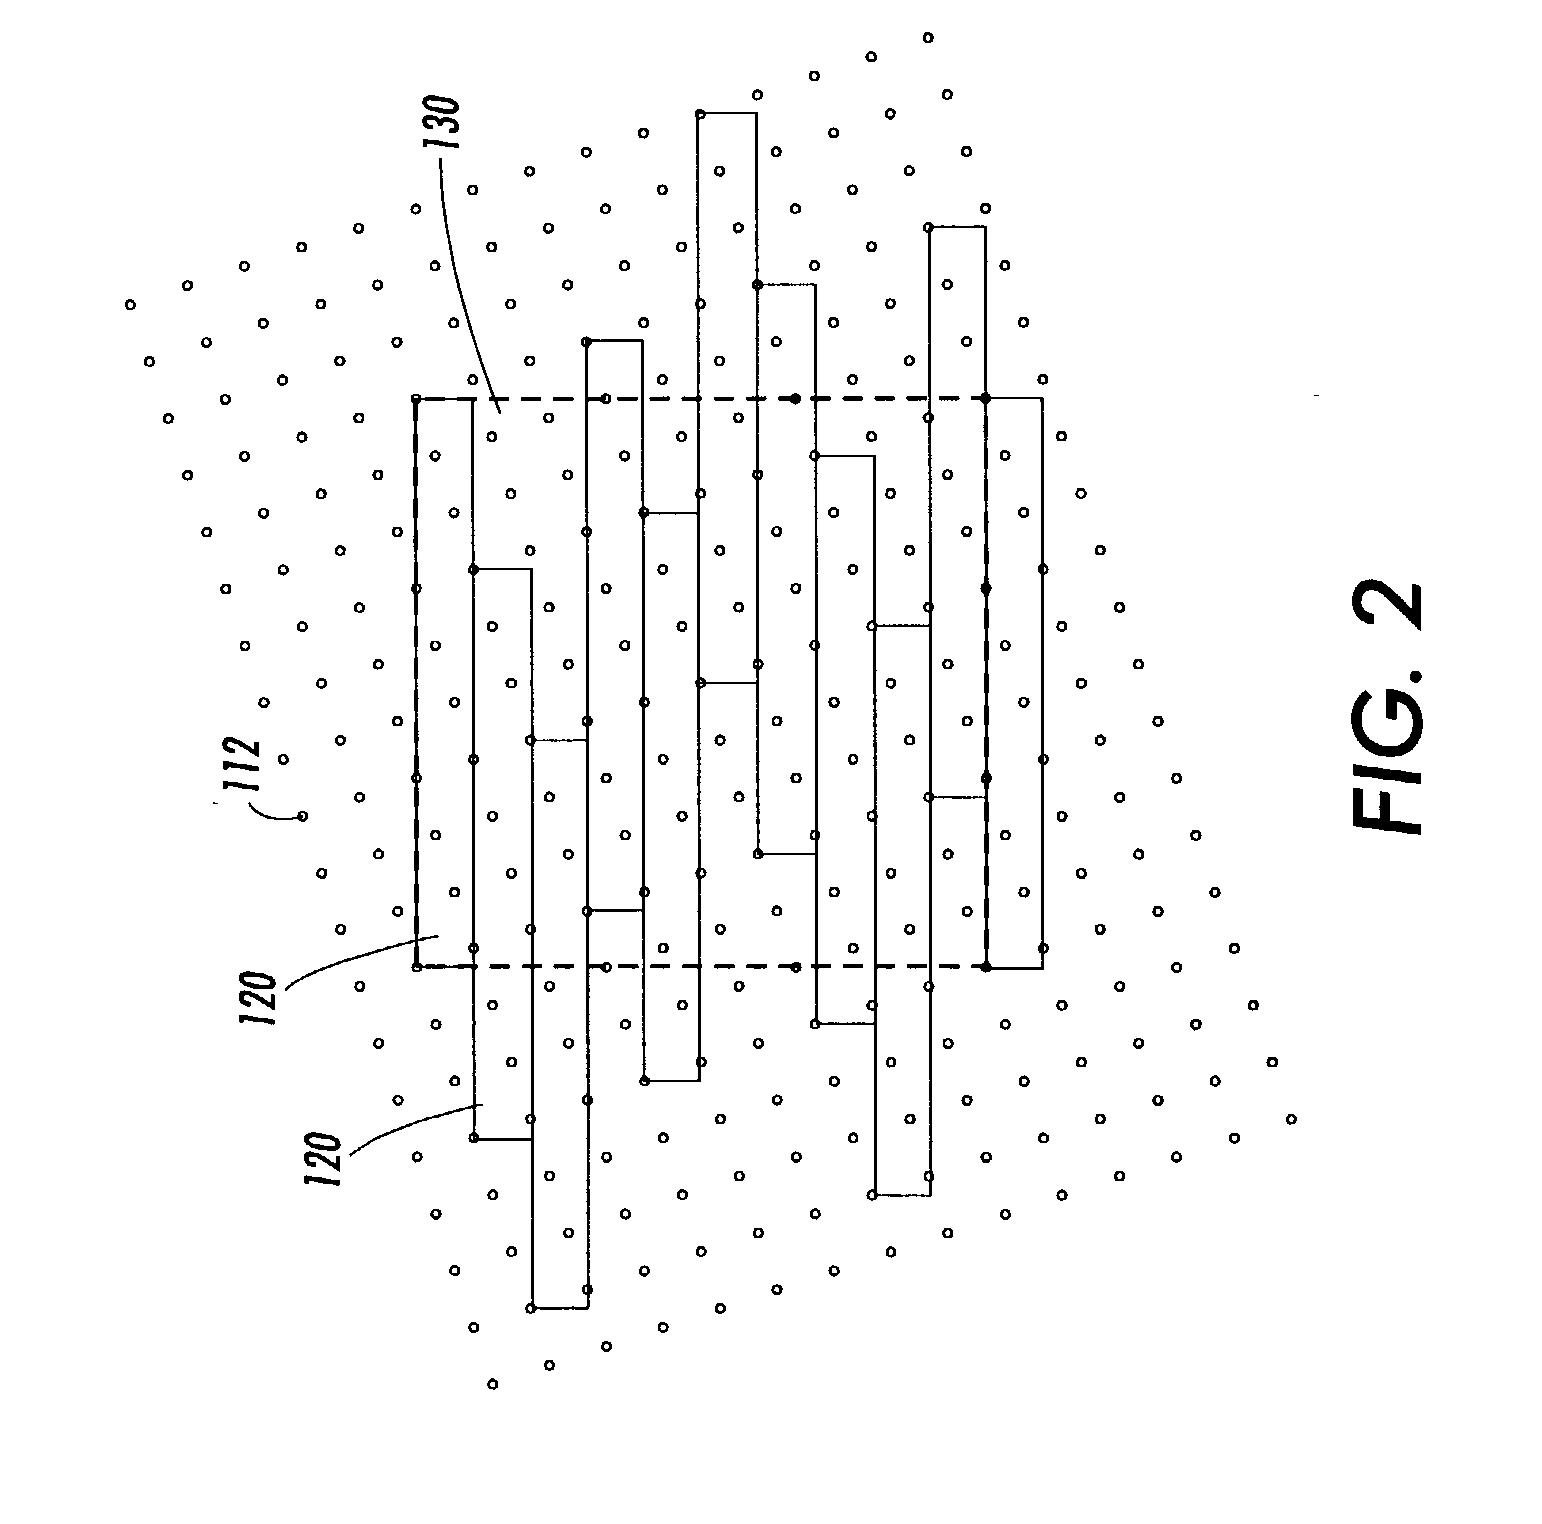 Systems and methods for designing zero-shift supercell halftone screens